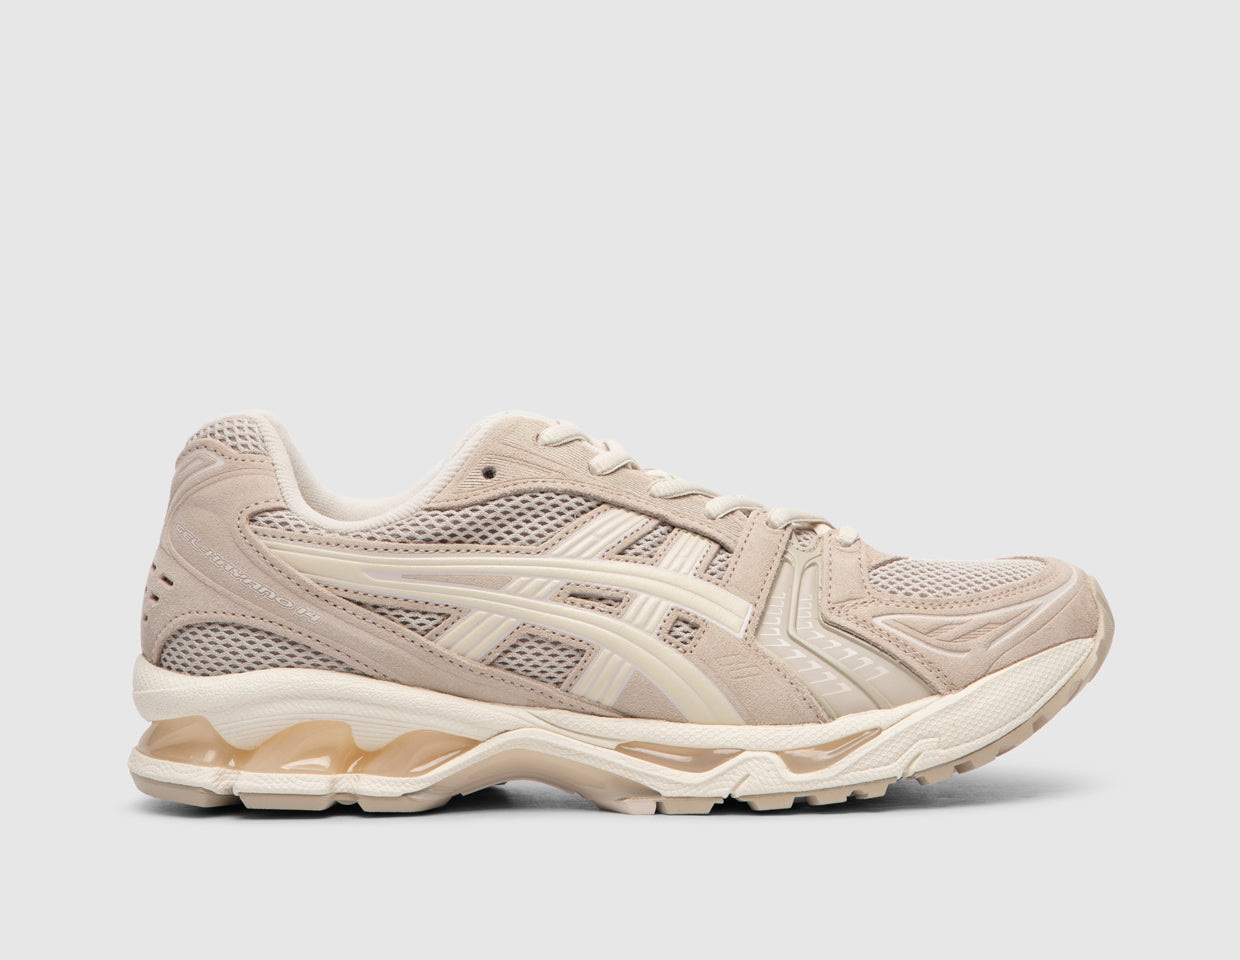 ASICS Shoes, Sneakers and Footwear | size? Canada